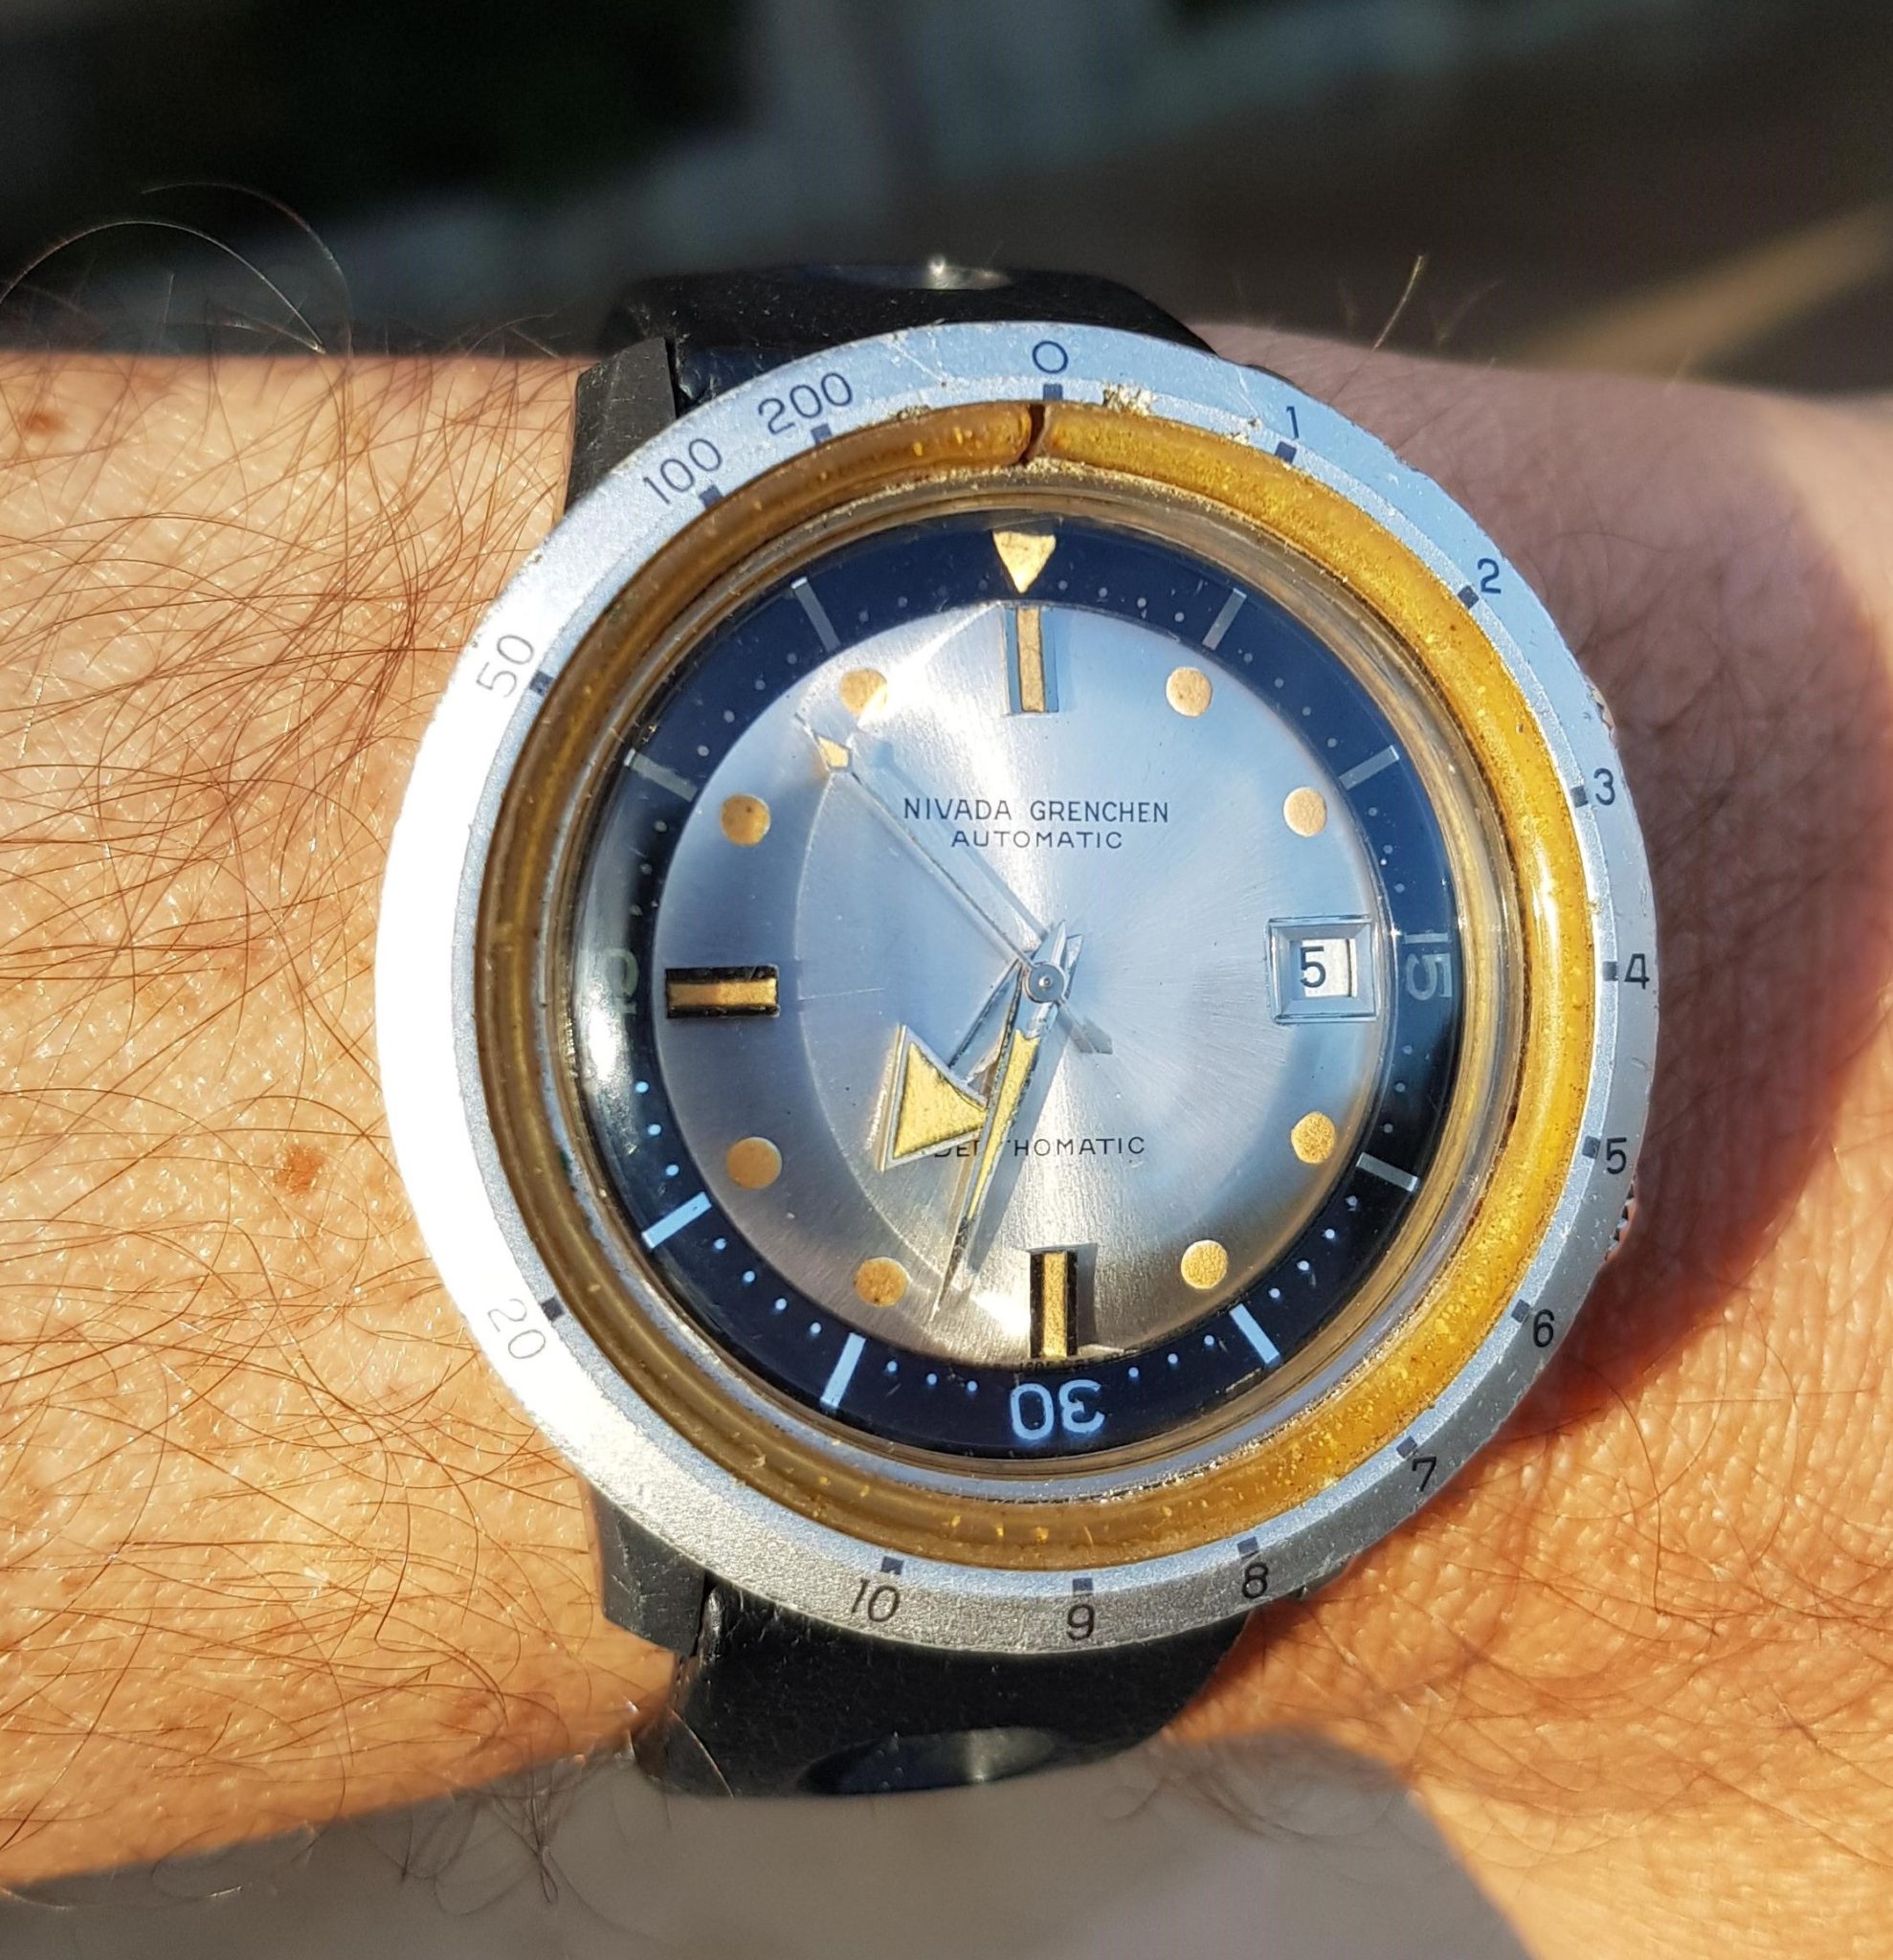 Owner Review: The Nivada Cousteau